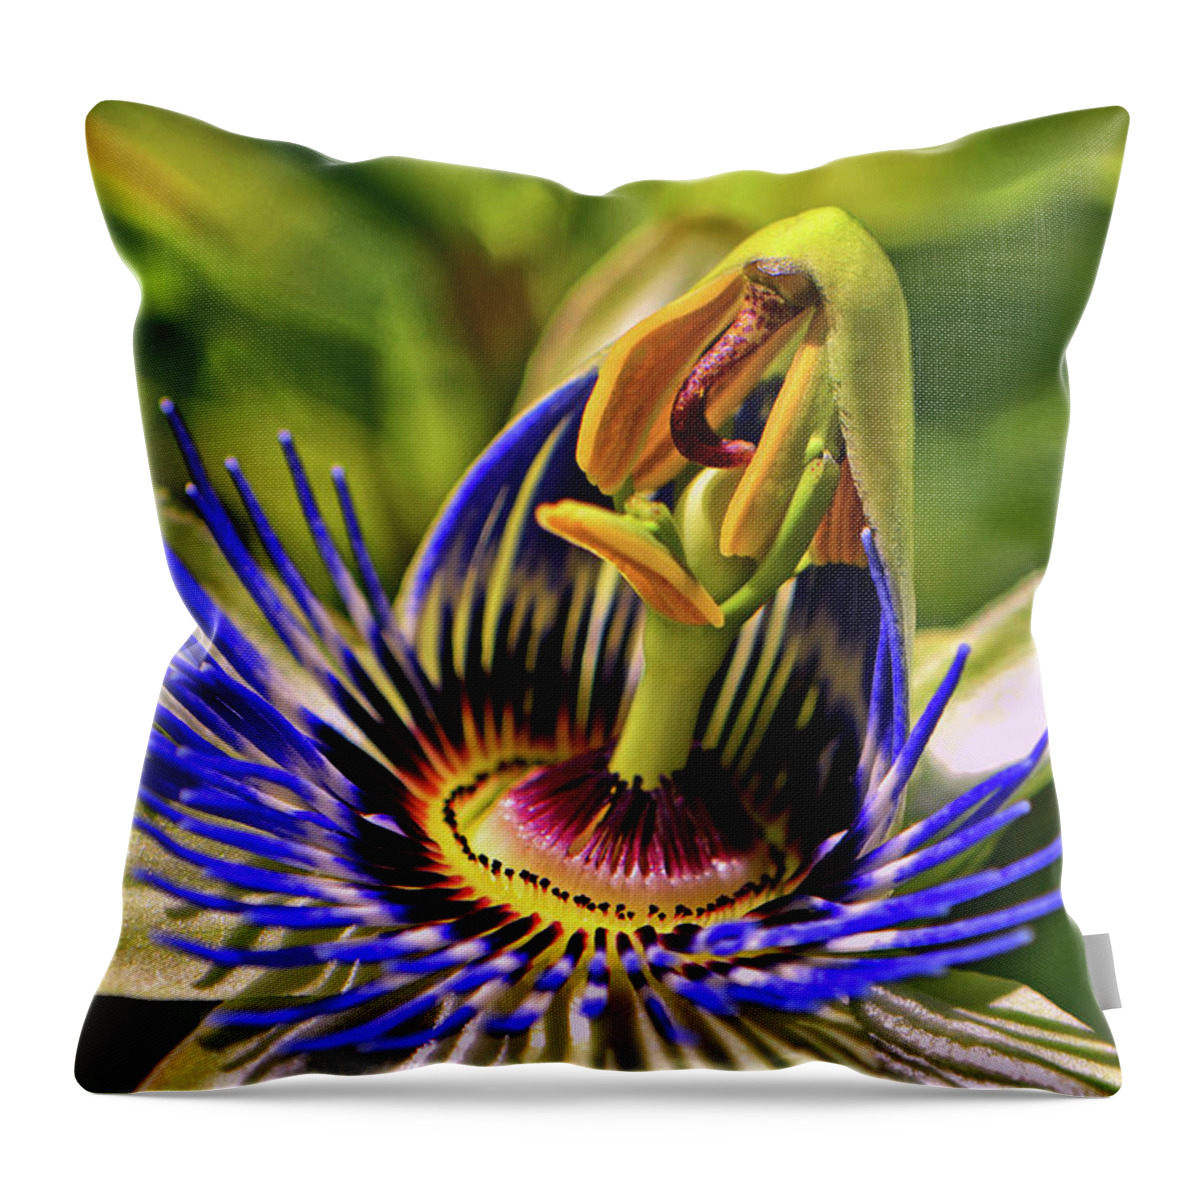 Passion Flower Throw Pillow featuring the photograph Blue Passion Flower - Still Opening 001 by George Bostian